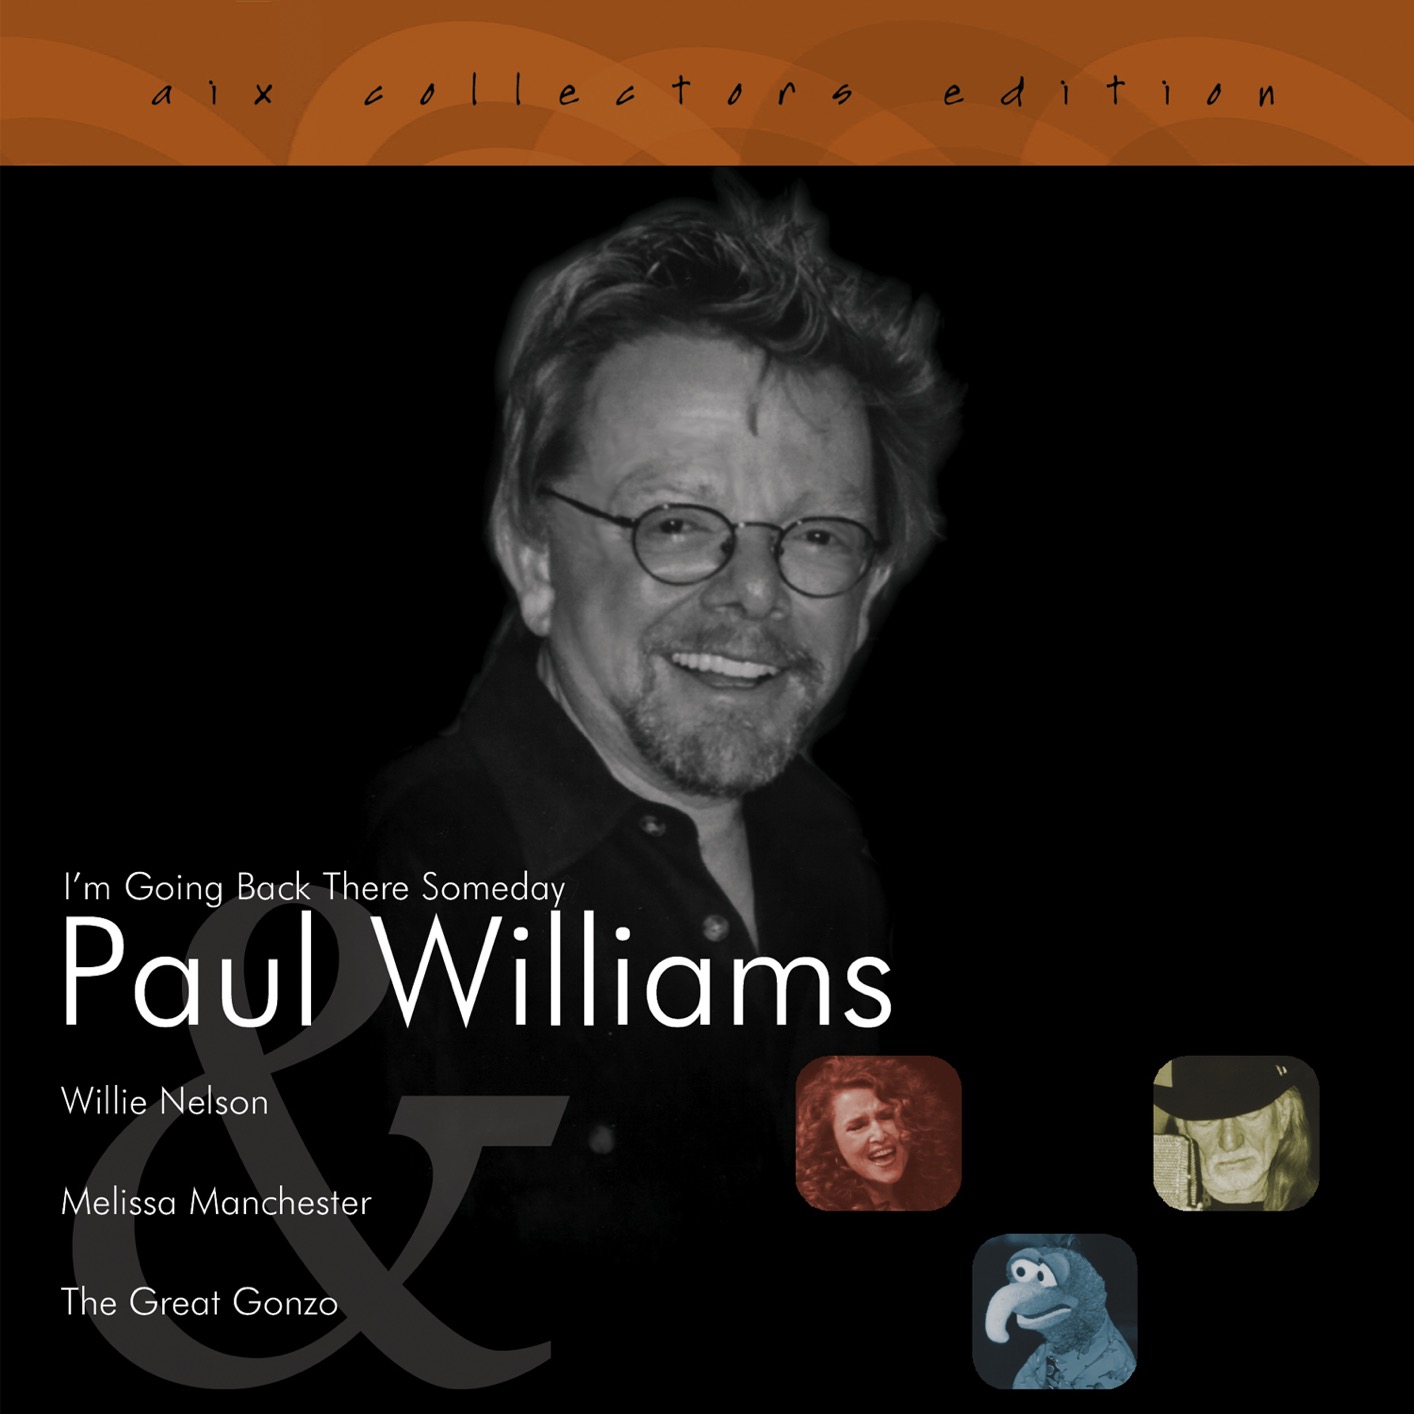 Paul Williams – I’m Going Back There Someday (Remastered) (2006/2019) [FLAC 24bit/96kHz]